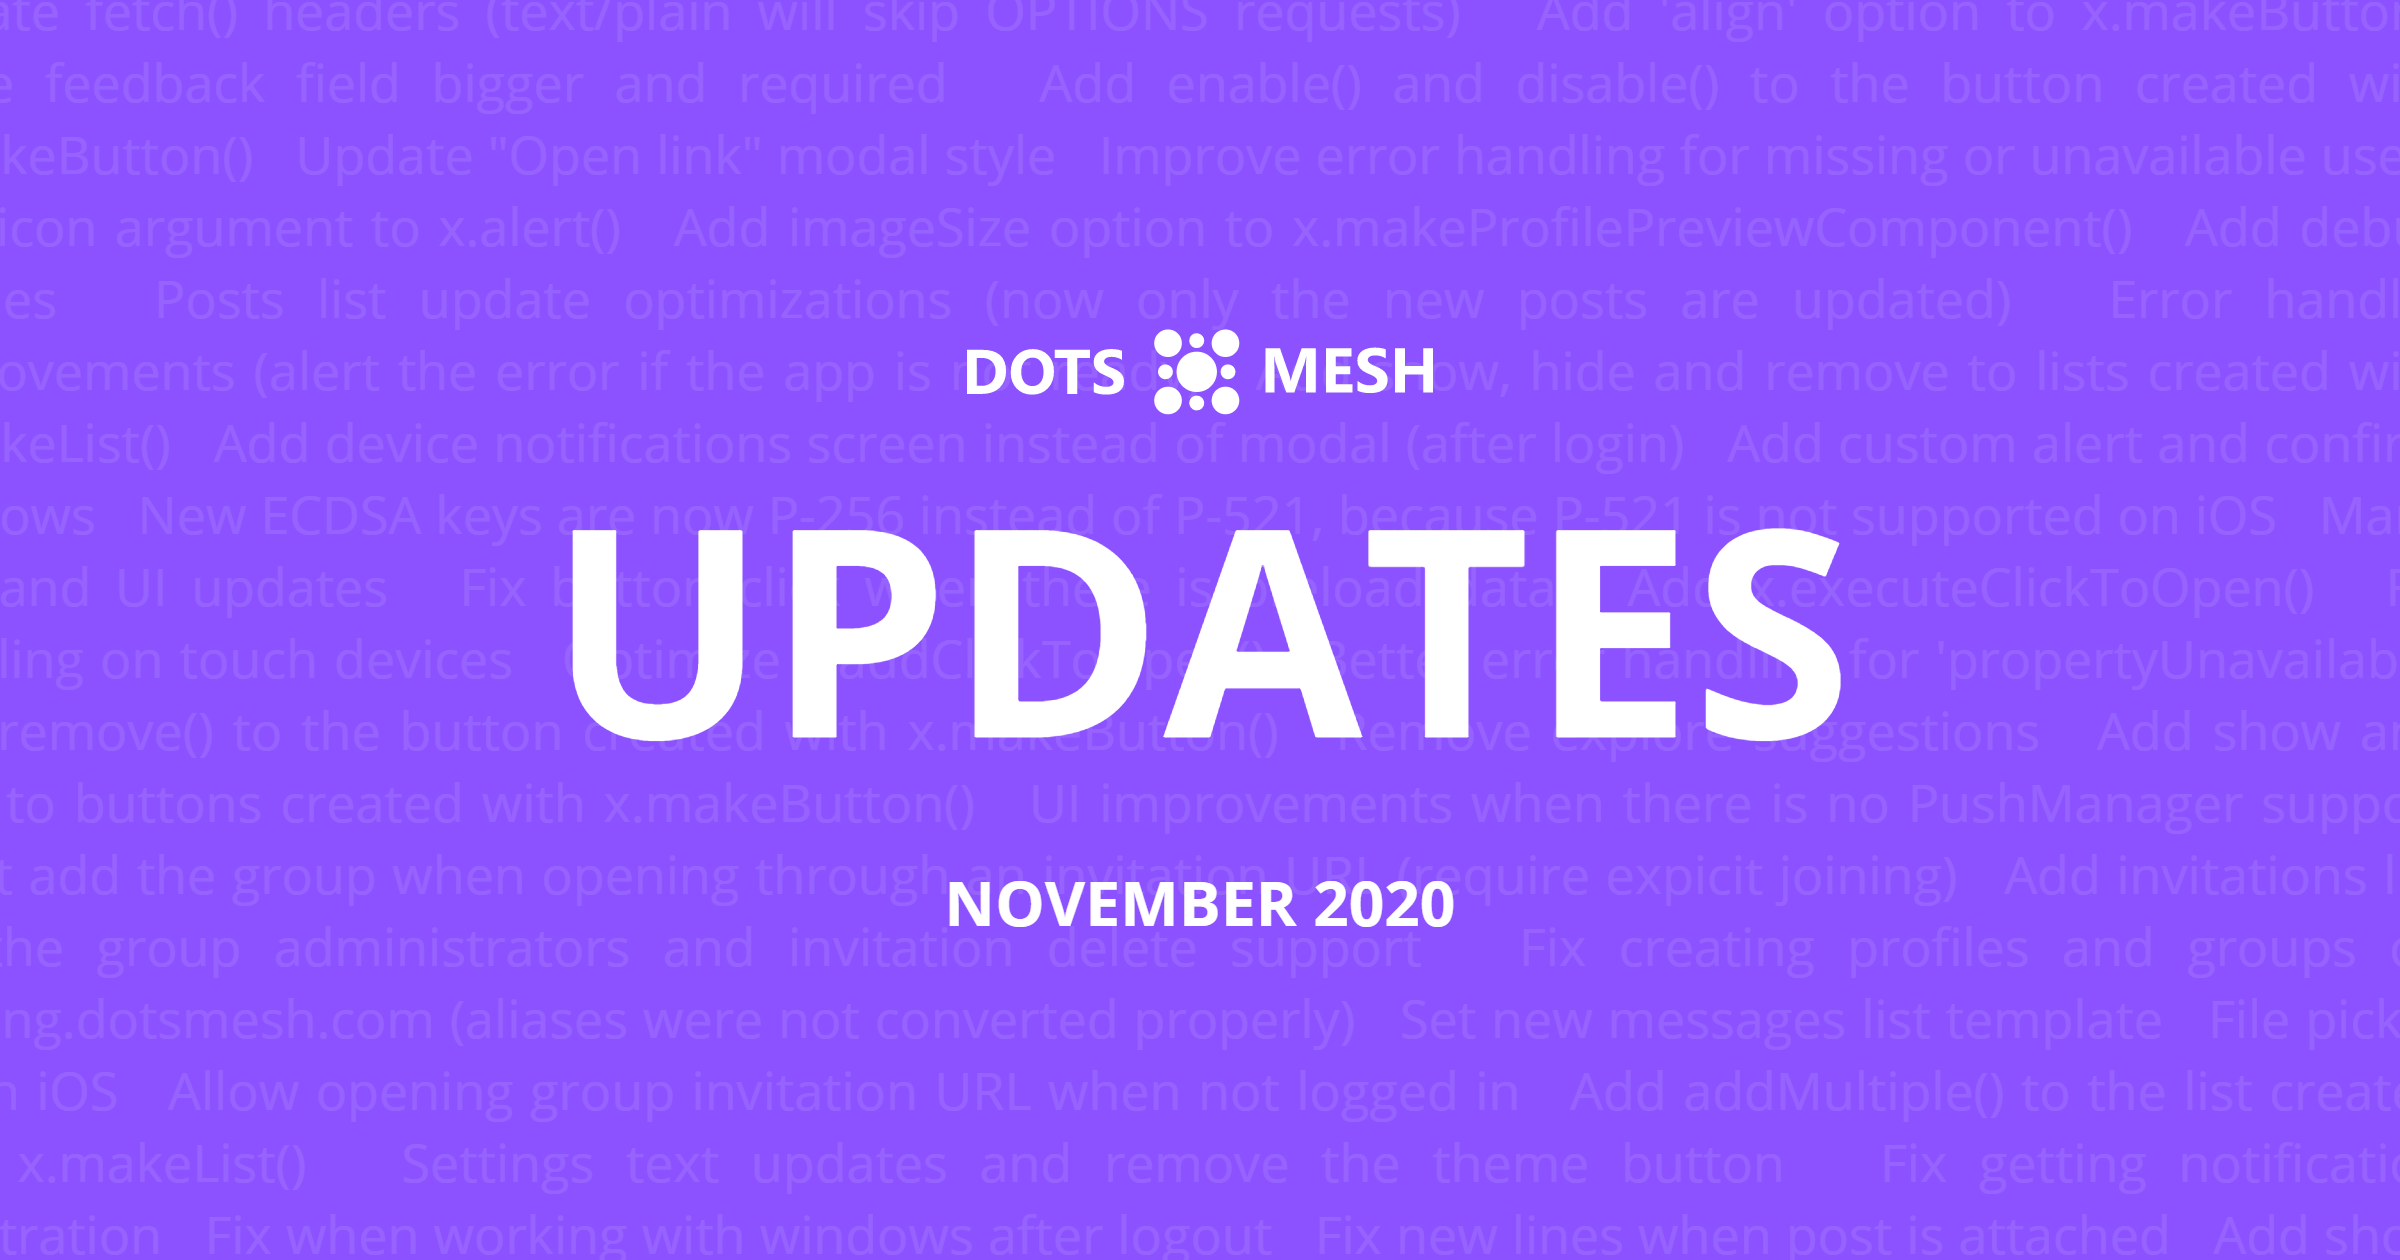 The official news about the Dots Mesh platform